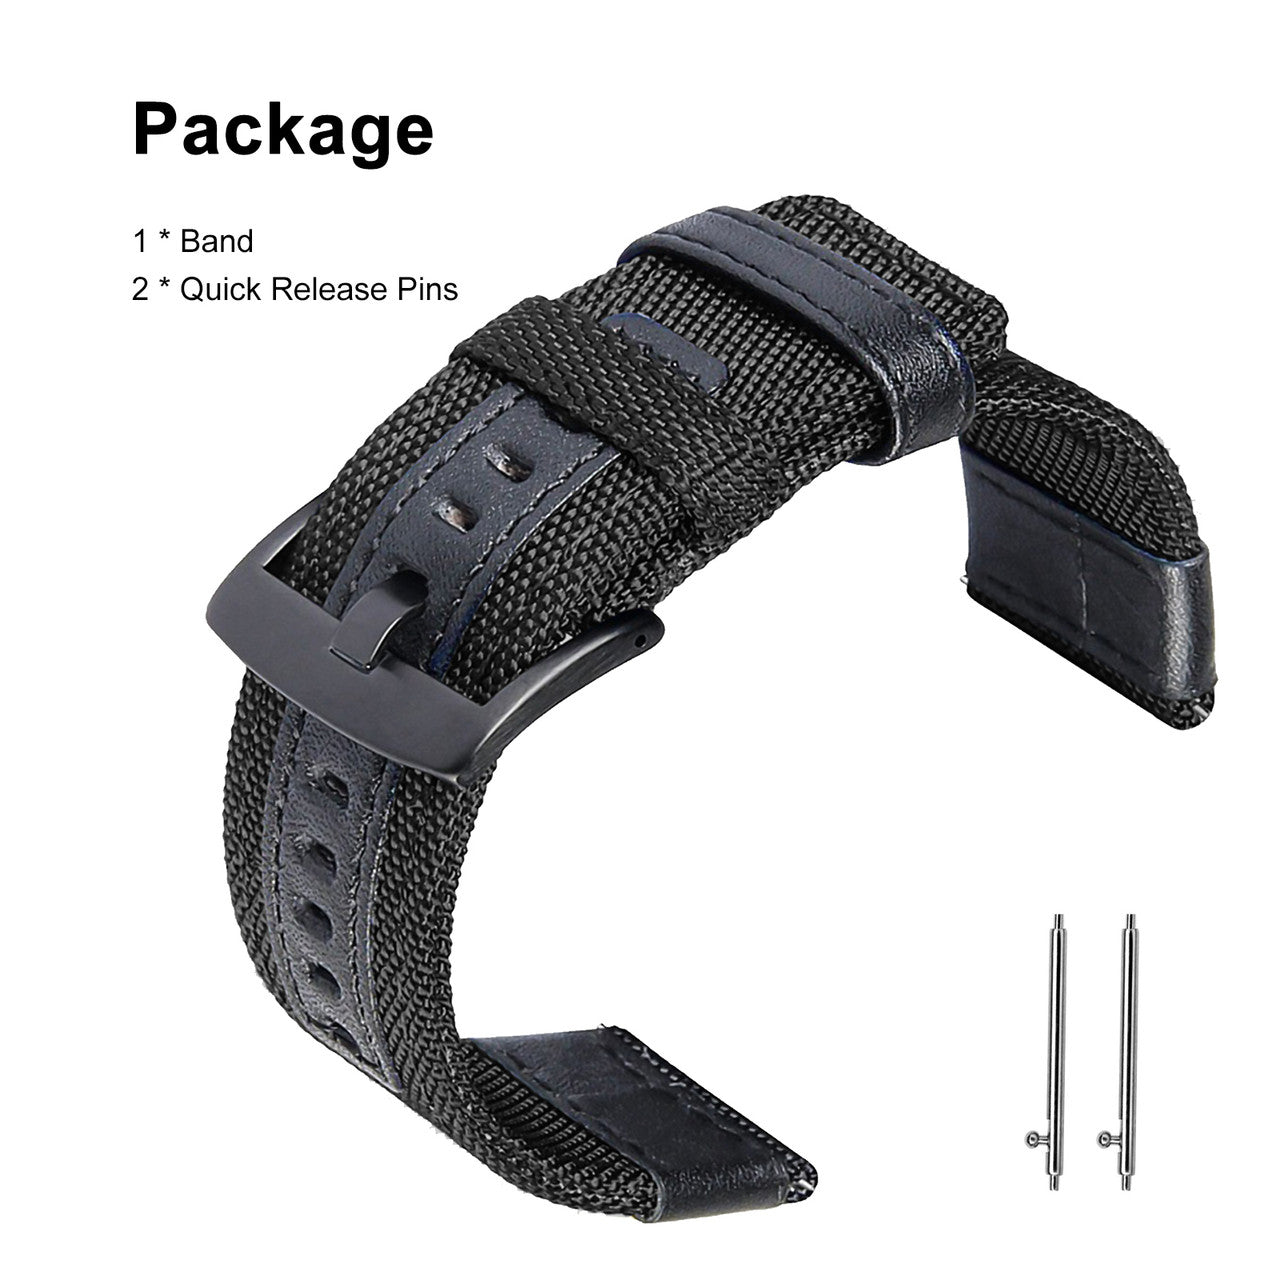 Compatible with Galaxy Watch 46mm Bands & Gear S3 Frontier Bands, 22mm Quick Release Nylon Sports Watch Band Strap Wristbands Bracelet fits for Gears S3 Classic / S3 Frontier Smart watch, Black